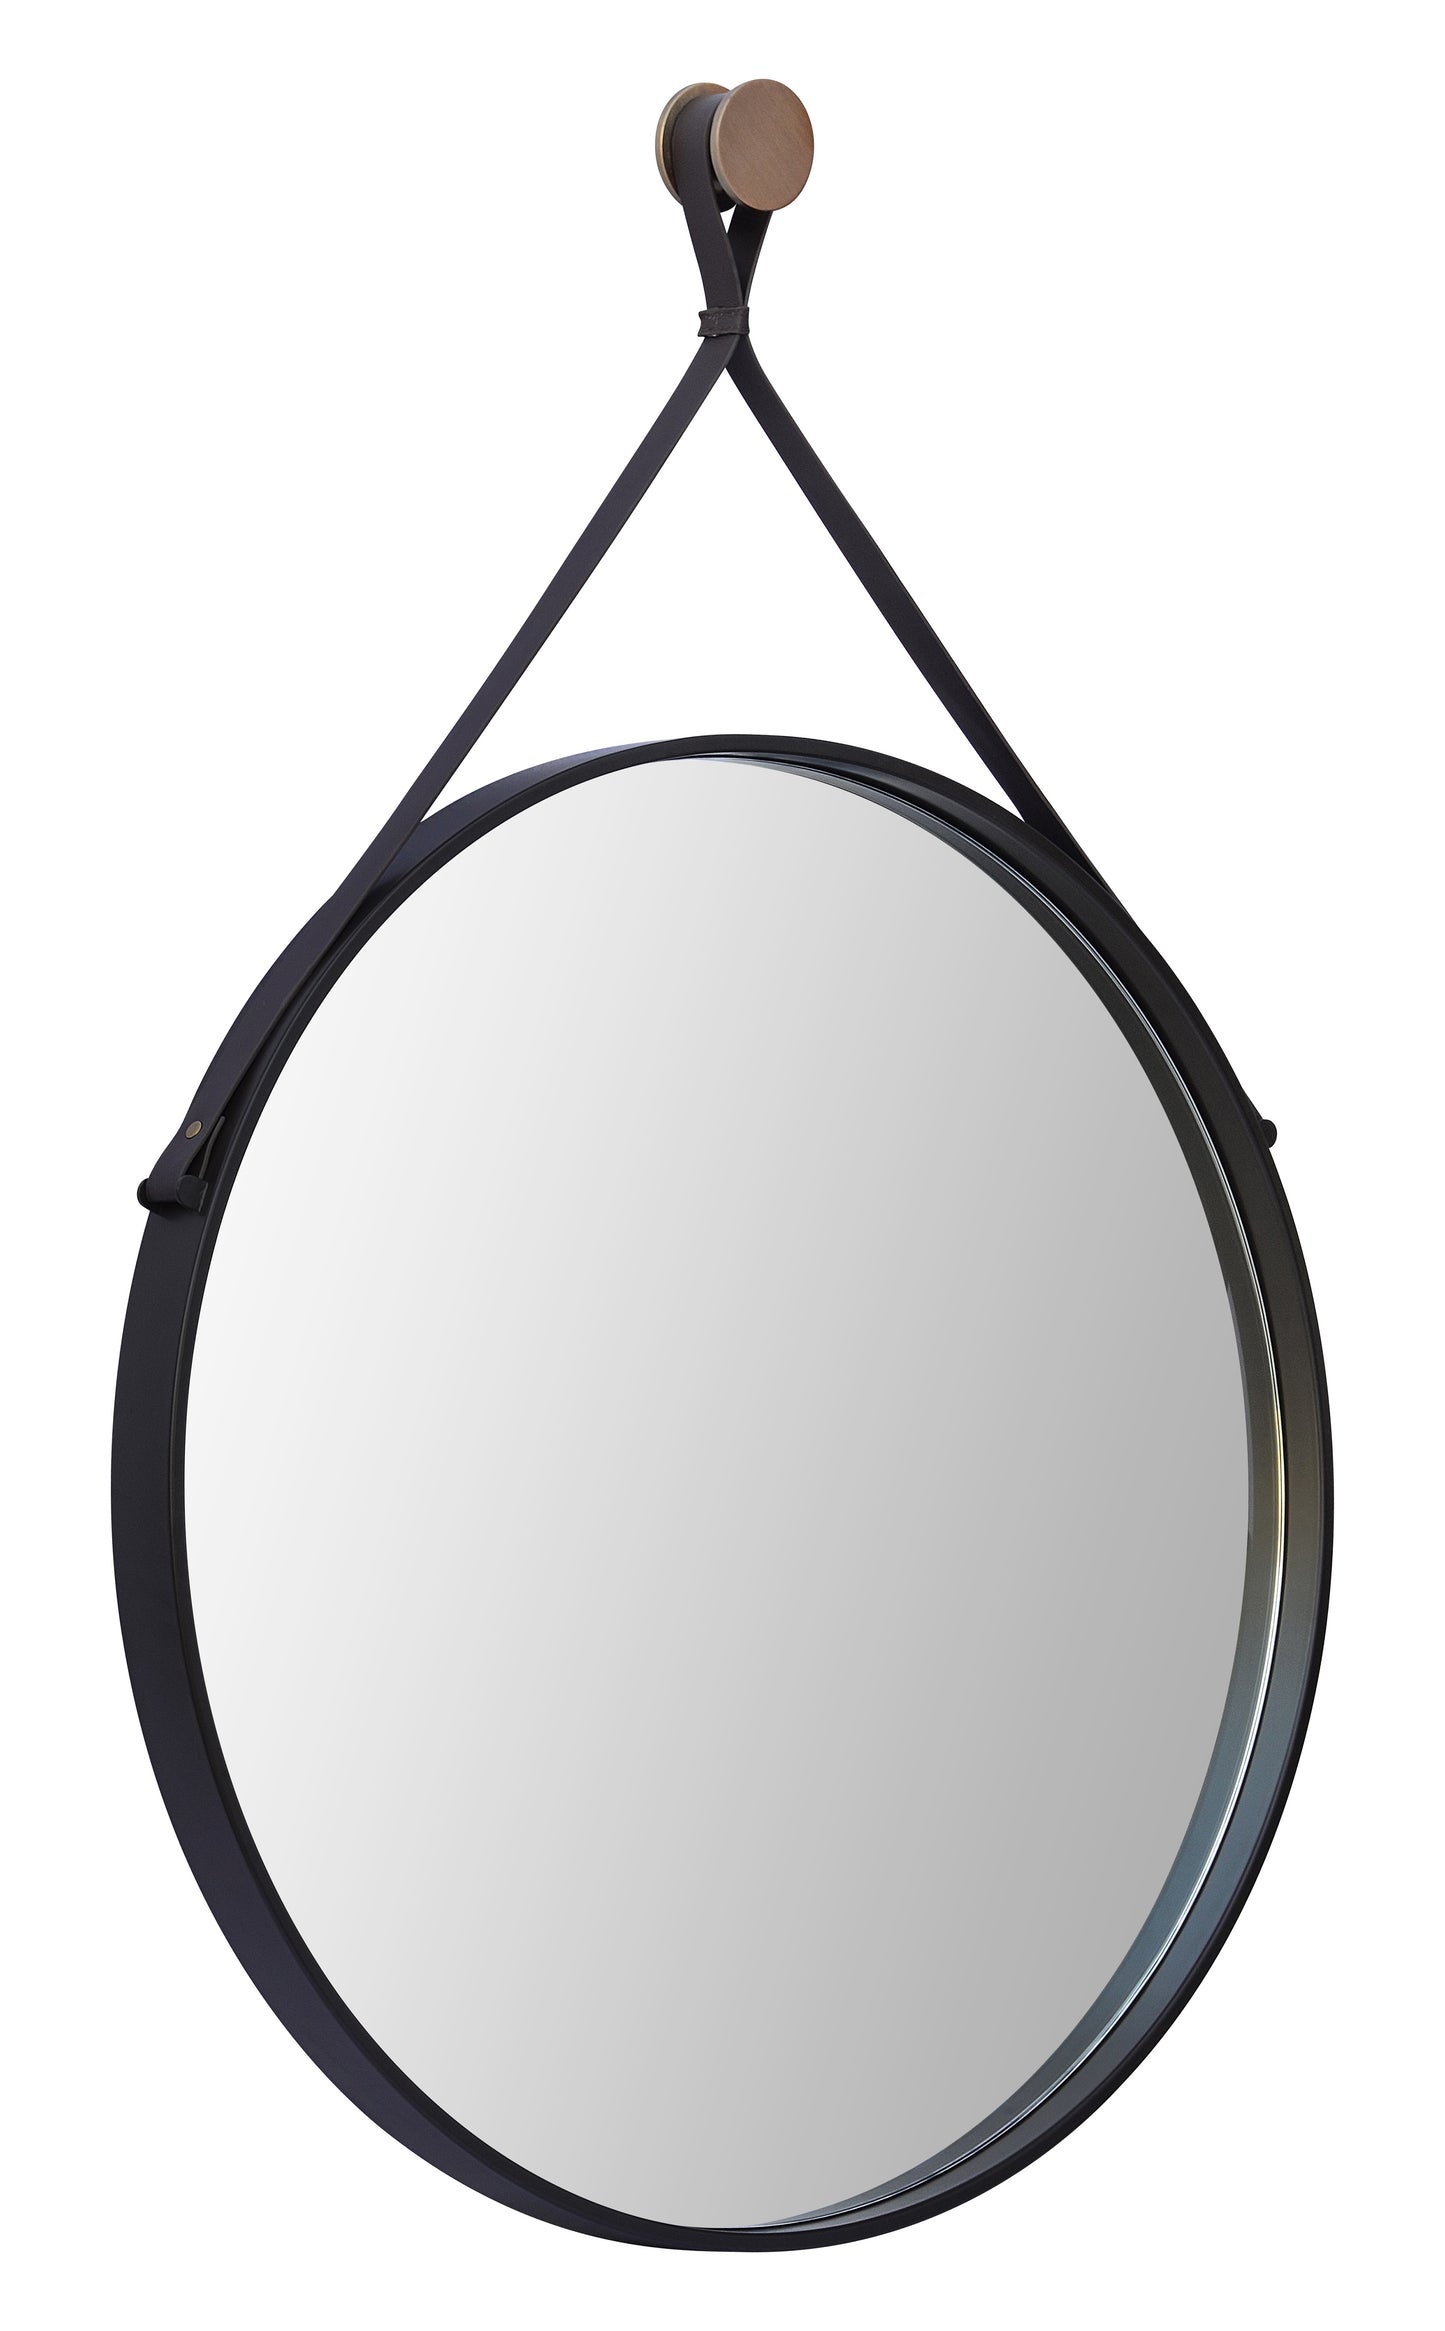 mirror with leather strap